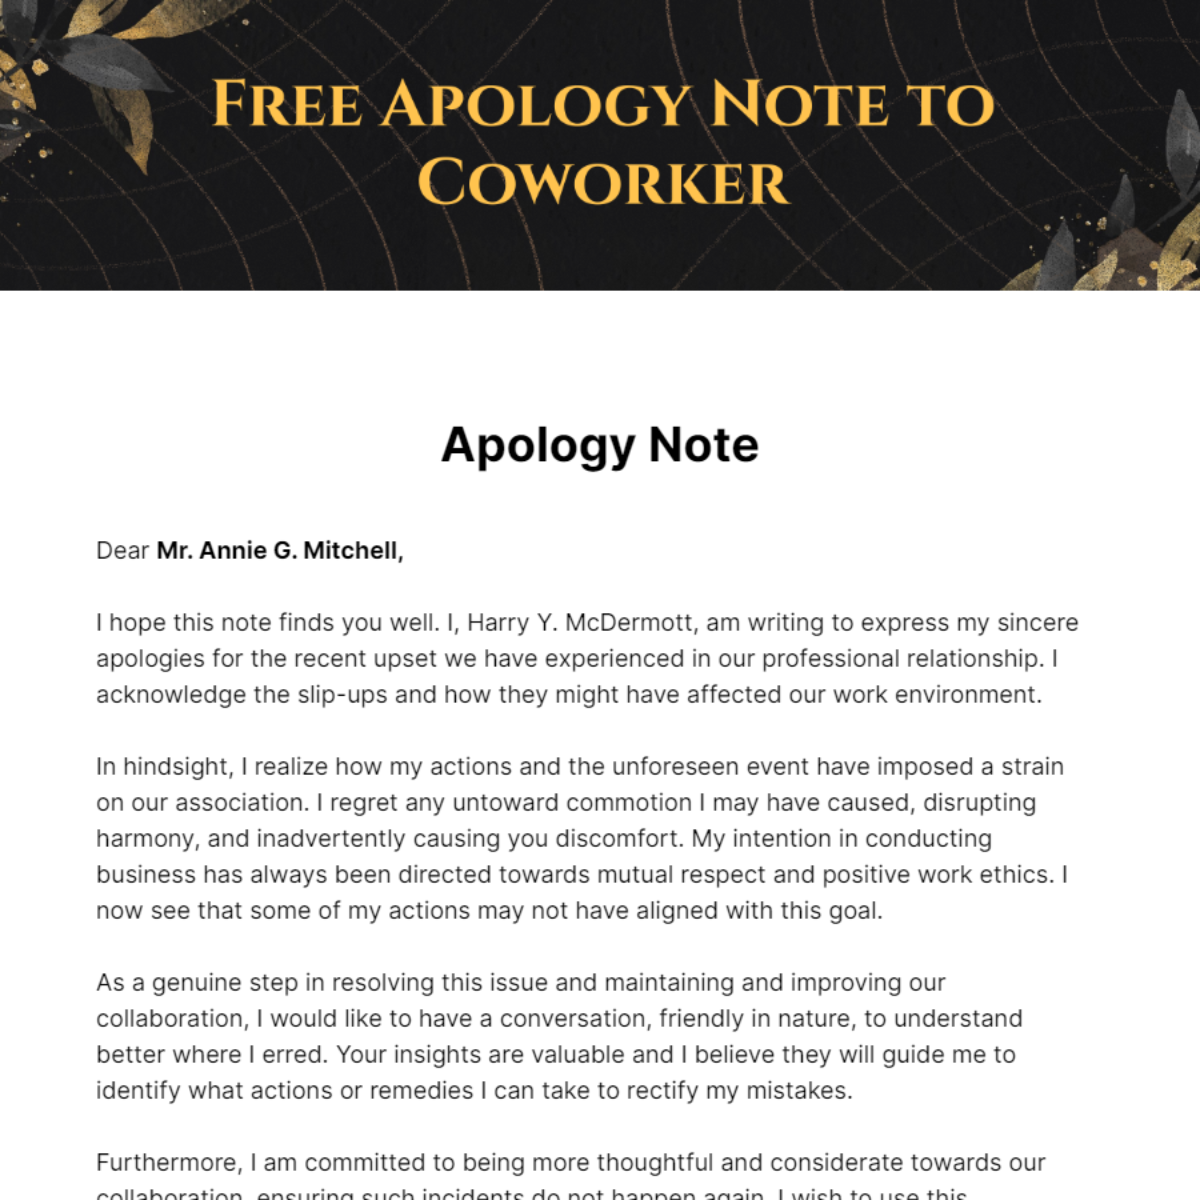 Free Apology Note to Coworker Template